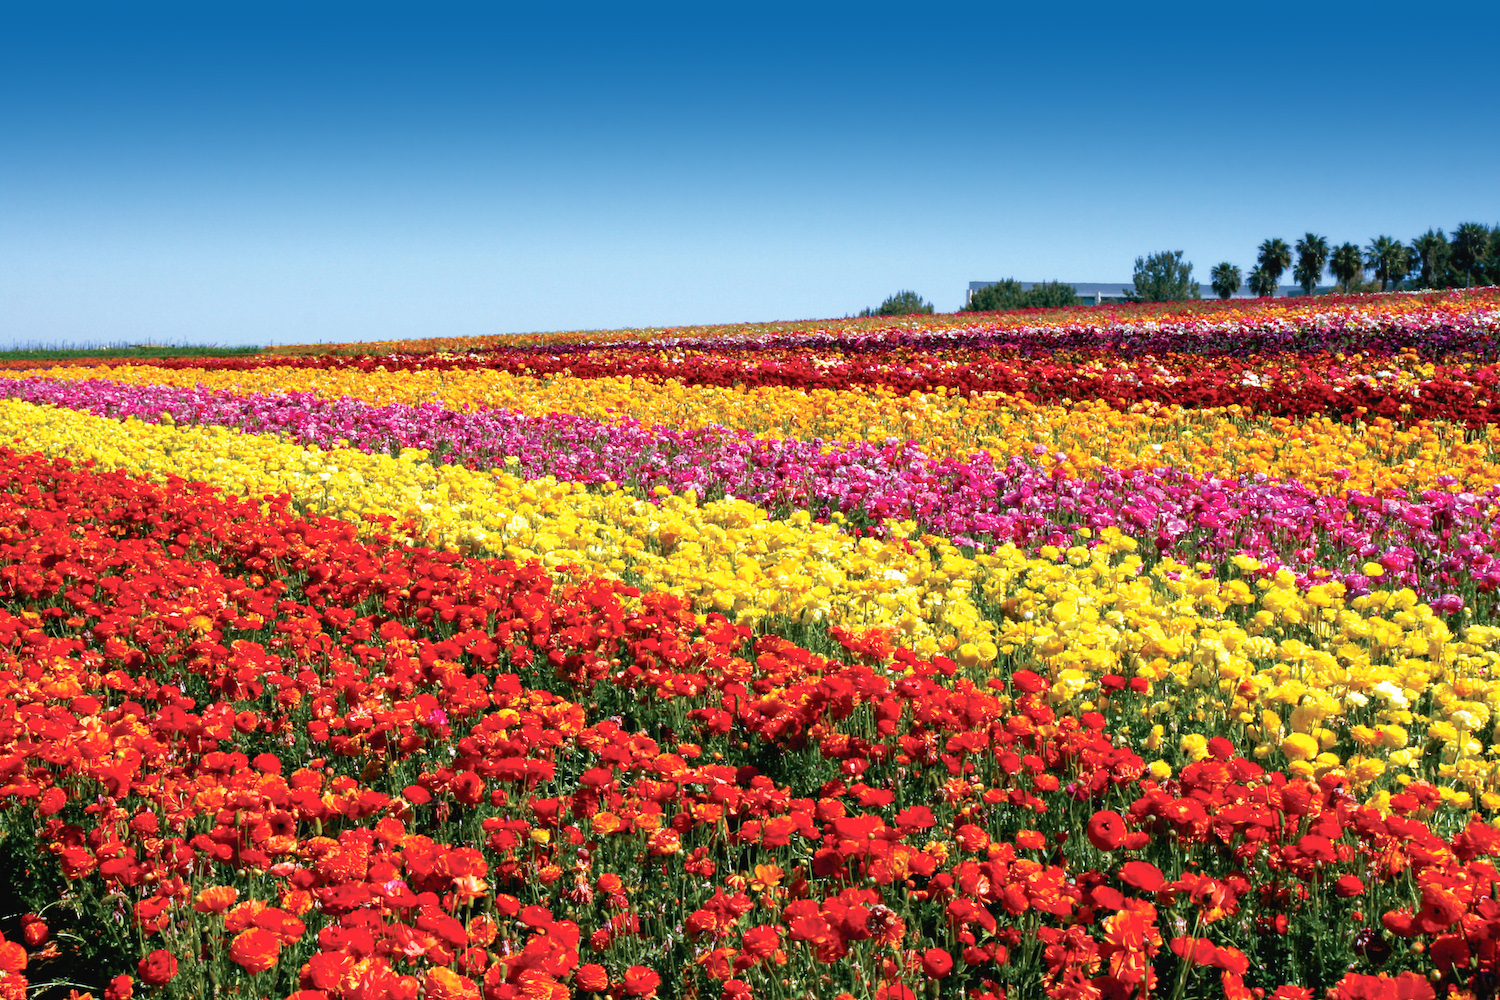 Things to do in San Diego this month of May including the Carlsbad Flower Fields